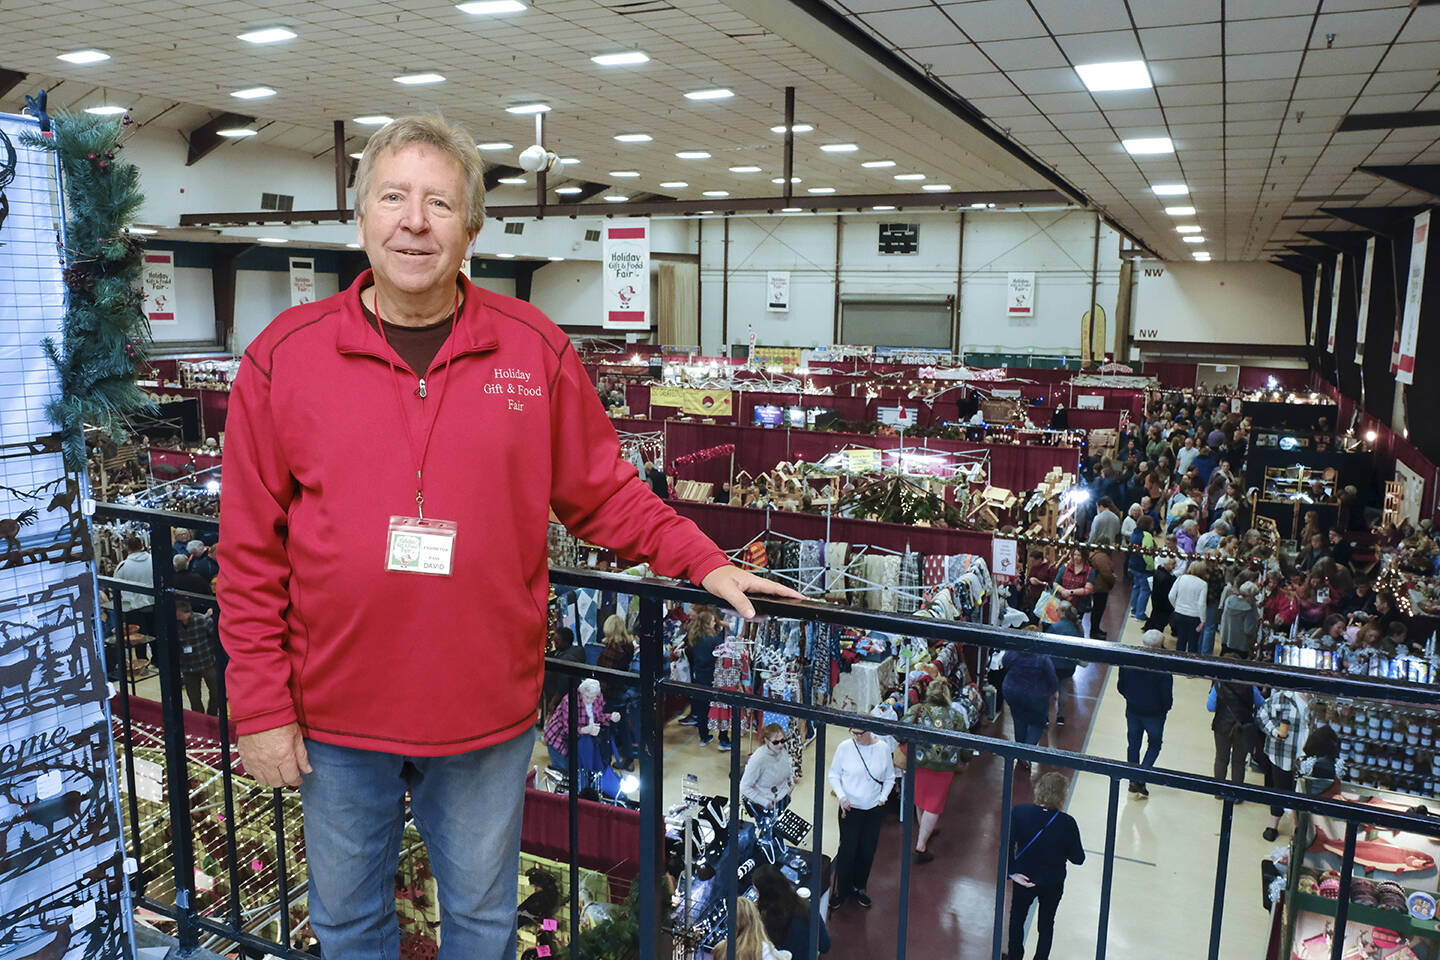 Organizer David Andersen looks over this year’s crowd at the gift show.